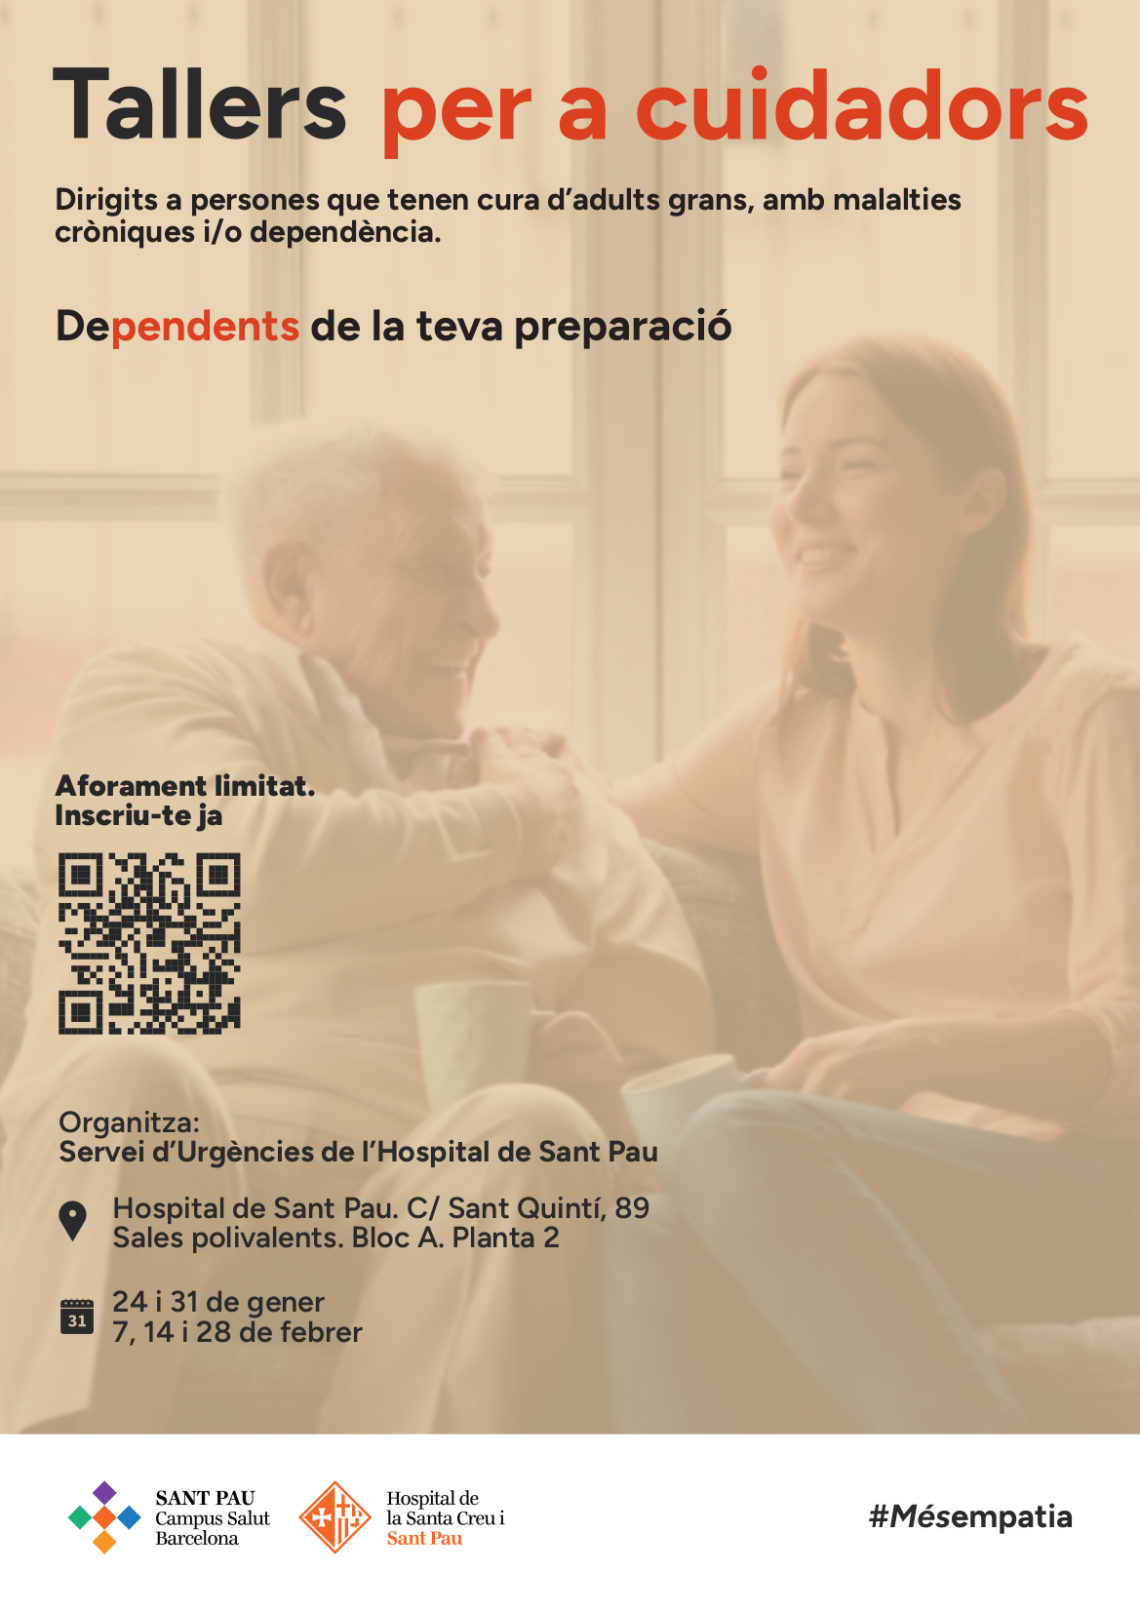 The service launches Workshops for Caregivers of frail people